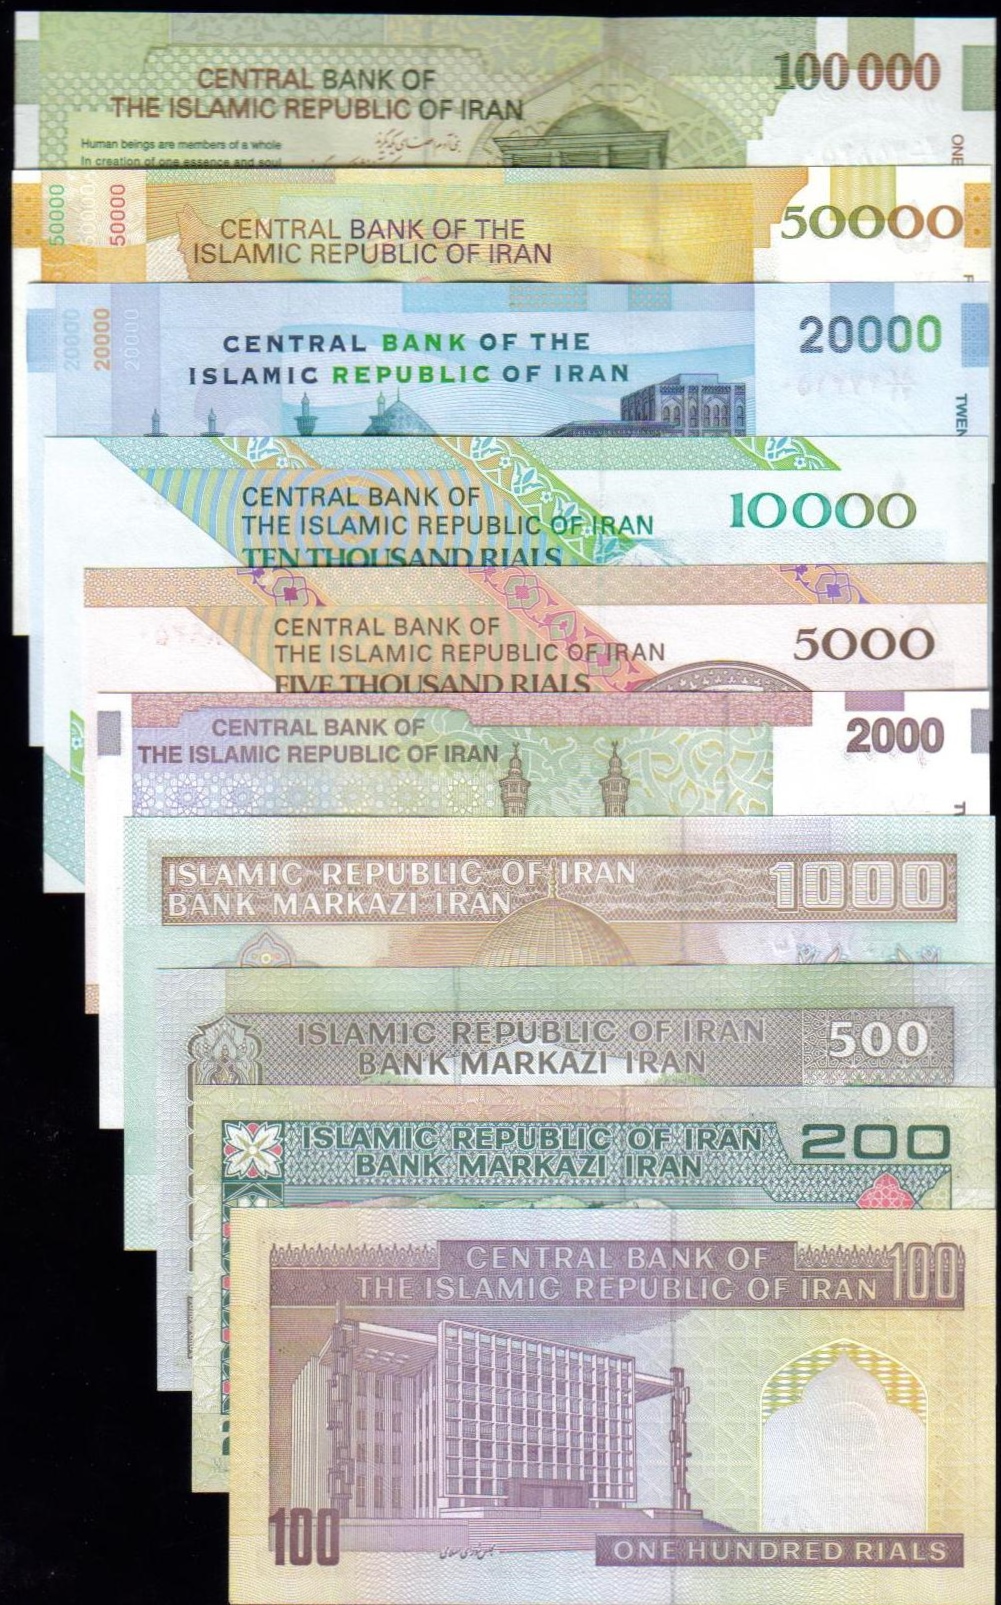 <font 130><font color=red><b>Set of 10 Banknotes </font></b><p>This is a complete set of current banknotes of Iran from 100 Rial to 100,000 Rial.  This is a nice way of having a sample of each denominations.  Most low values are no longer printed, and fetch $1 to $5.00 each. <p><a href="/shop/catalog/images/Iran-Set-of-10.jpg"><font color=blue>(Click to see the fronts) </font></a>  <a href="/shop/catalog/images/Iran-Set-of-10-Back.jpg"><font color=blue>(Click to see the backs)</font></a>